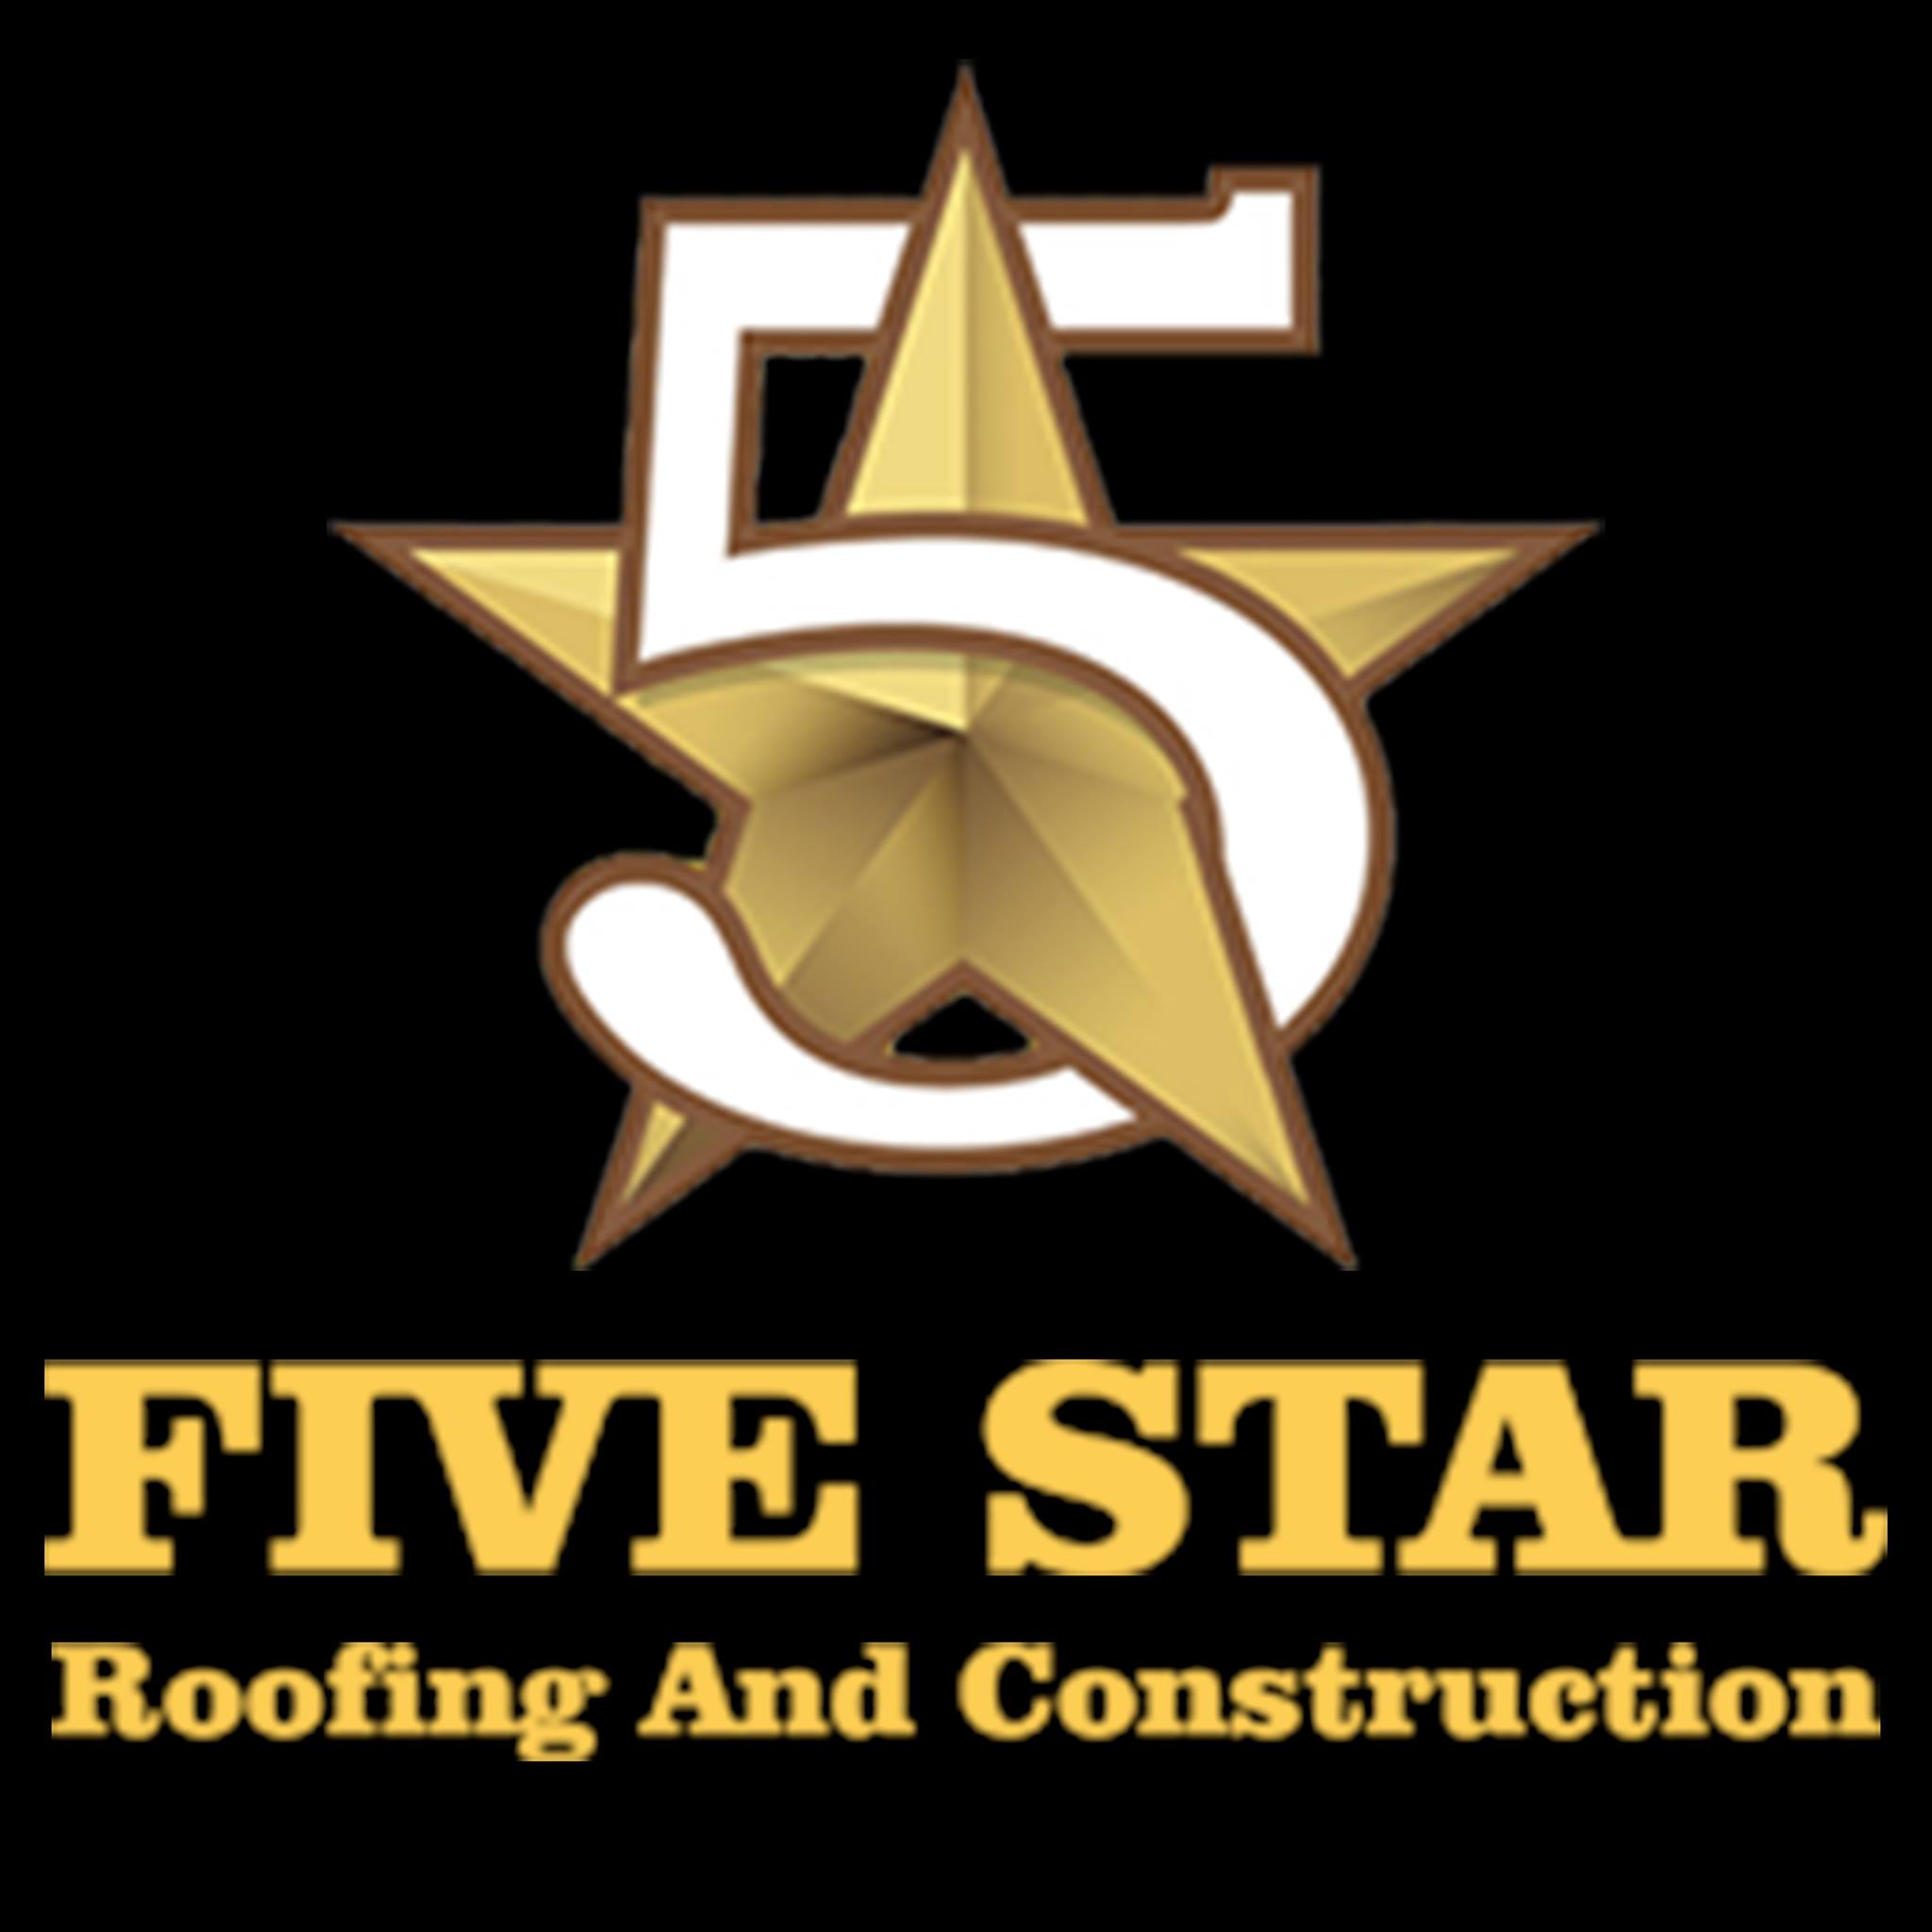 5 Star Roofing & Construction